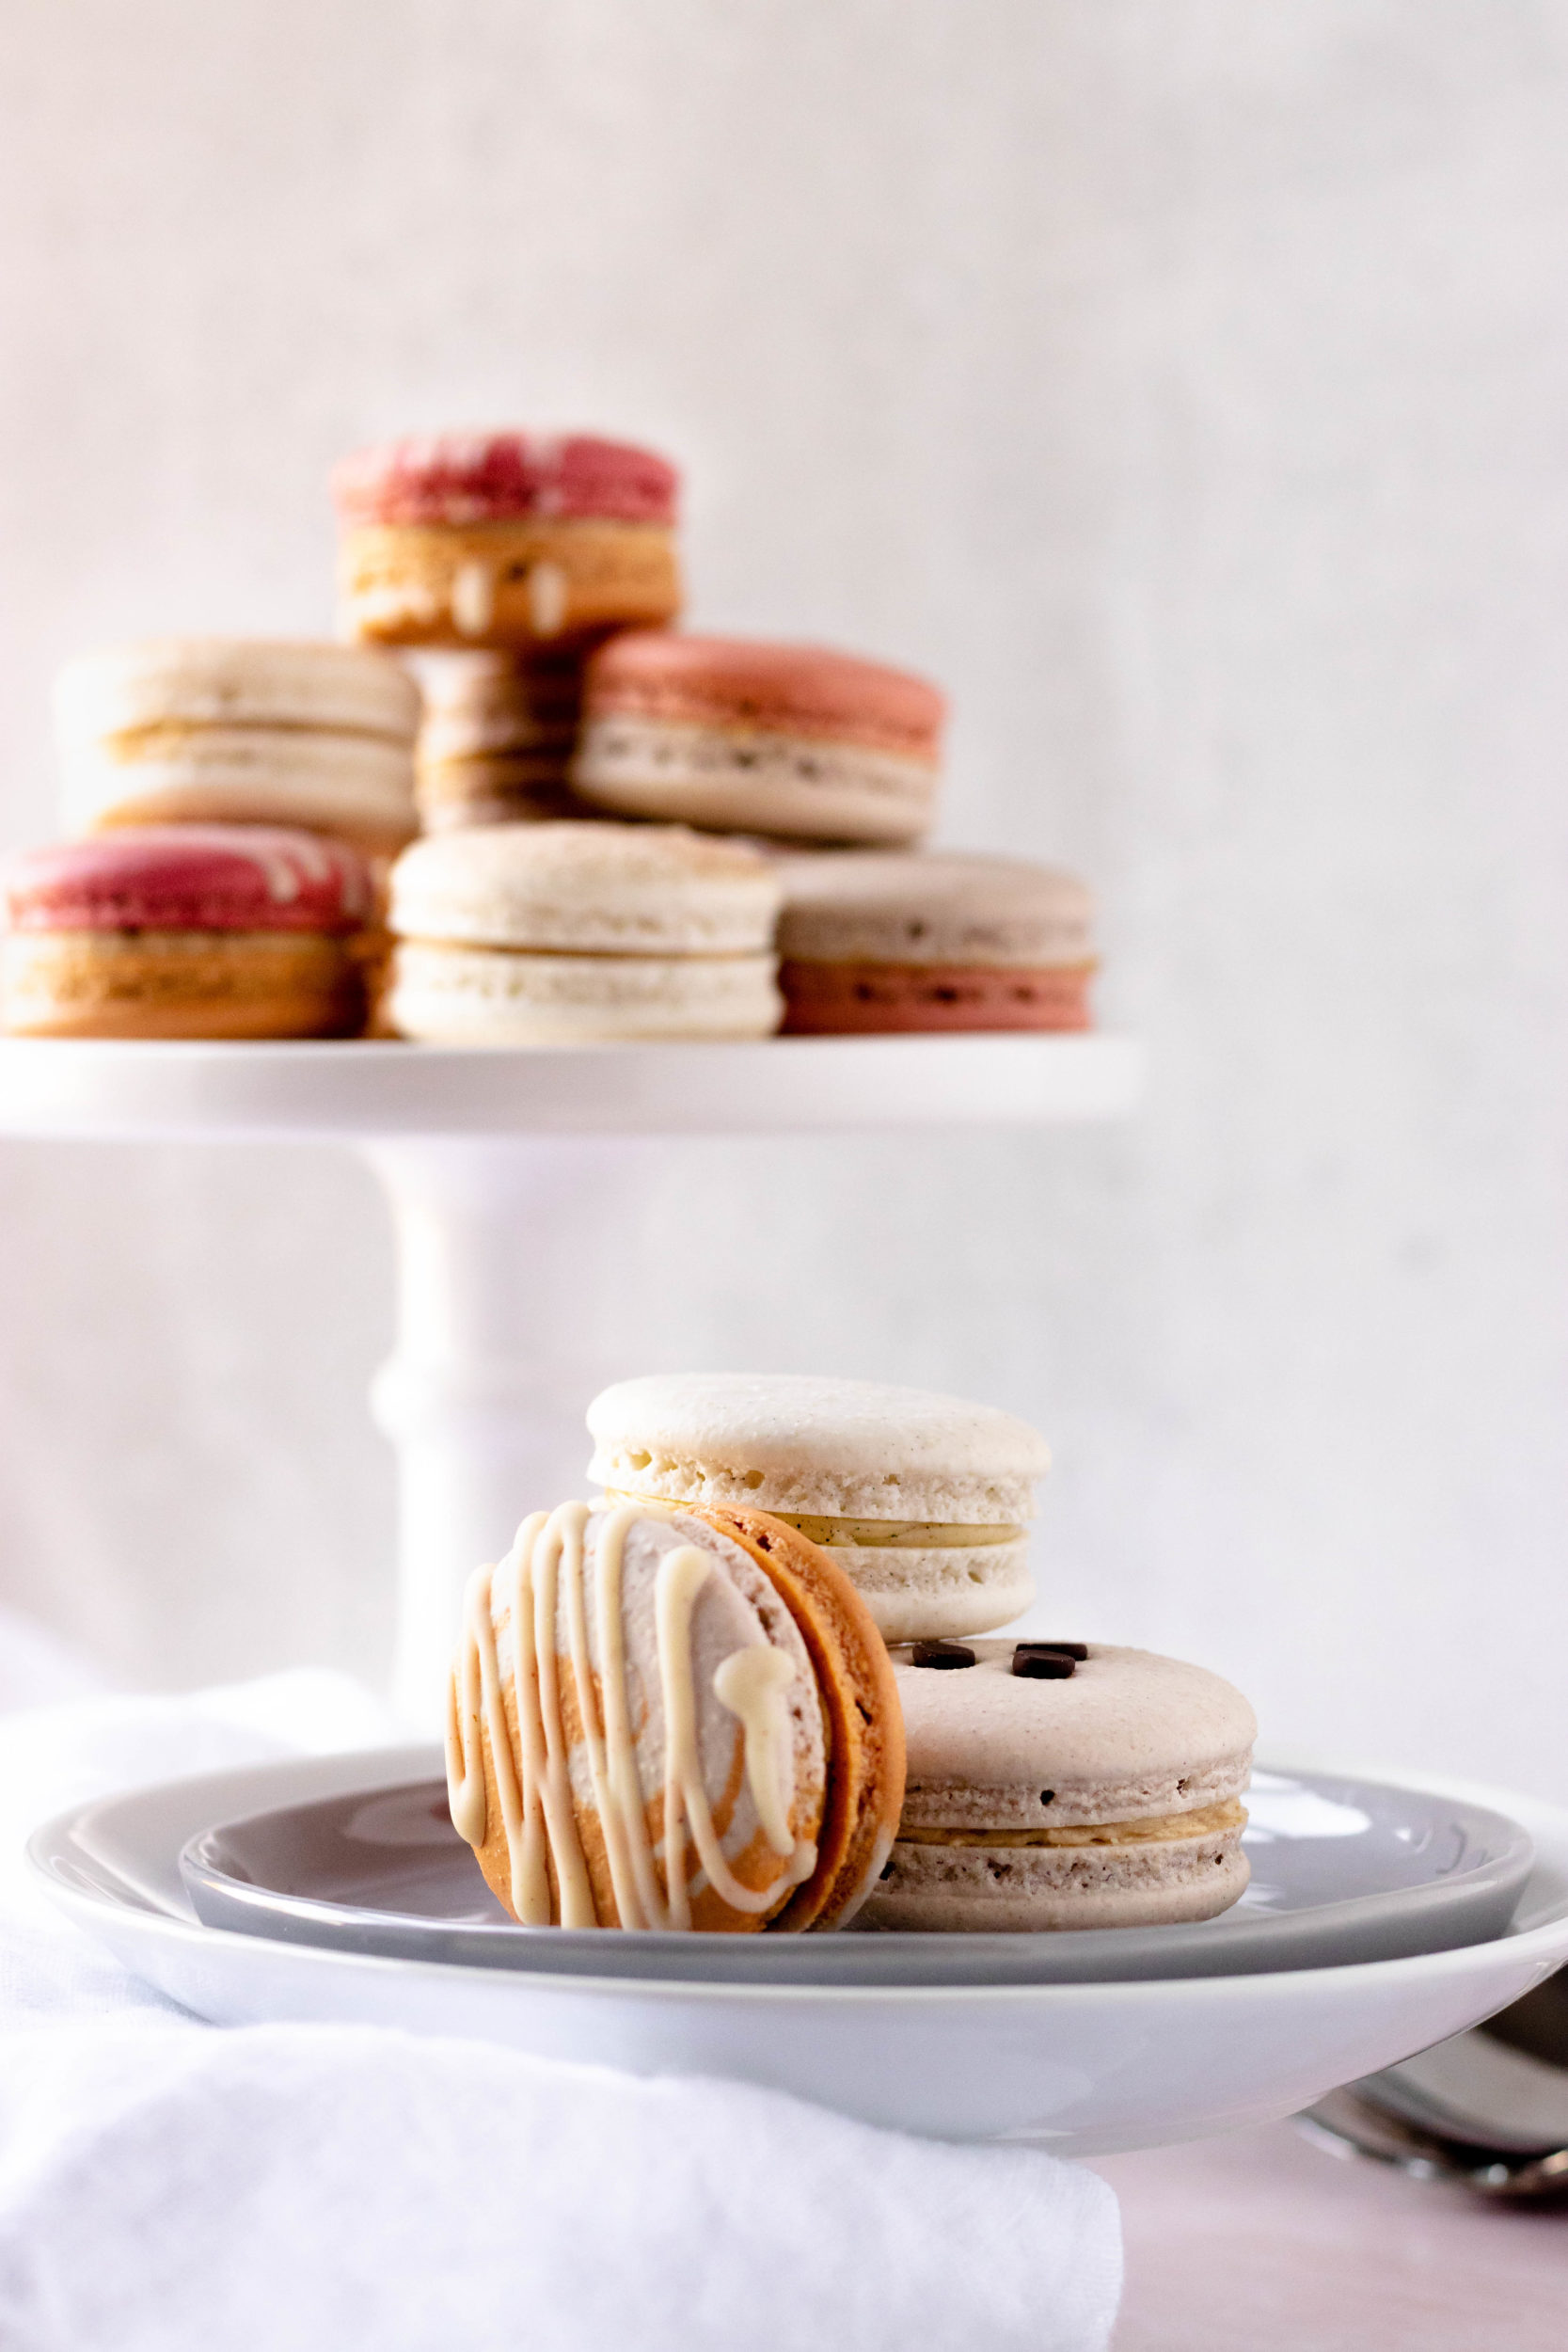 A cake platter of macarons in the background with layered plates with macarons on them in the foreground.